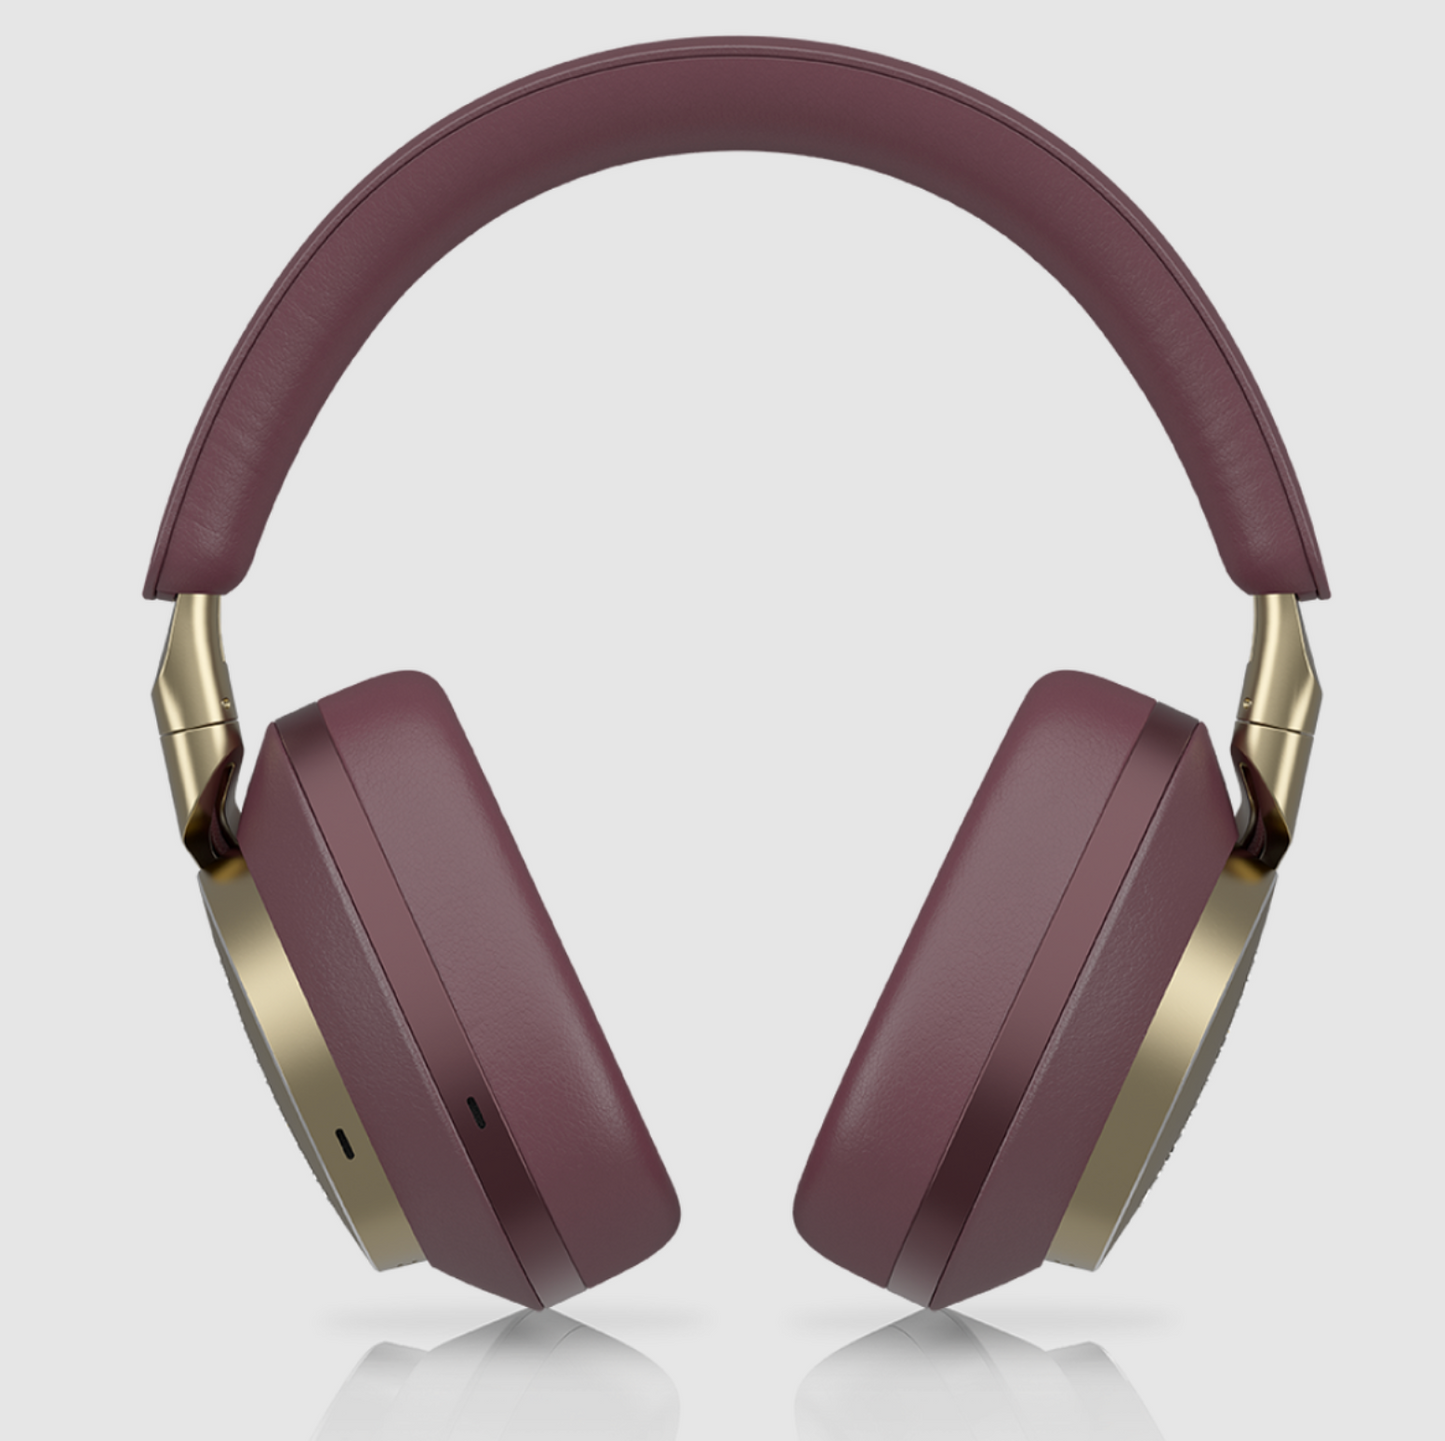 B&W Px8 Noise Cancelling Headphones in Royal Burgundy. Image of front